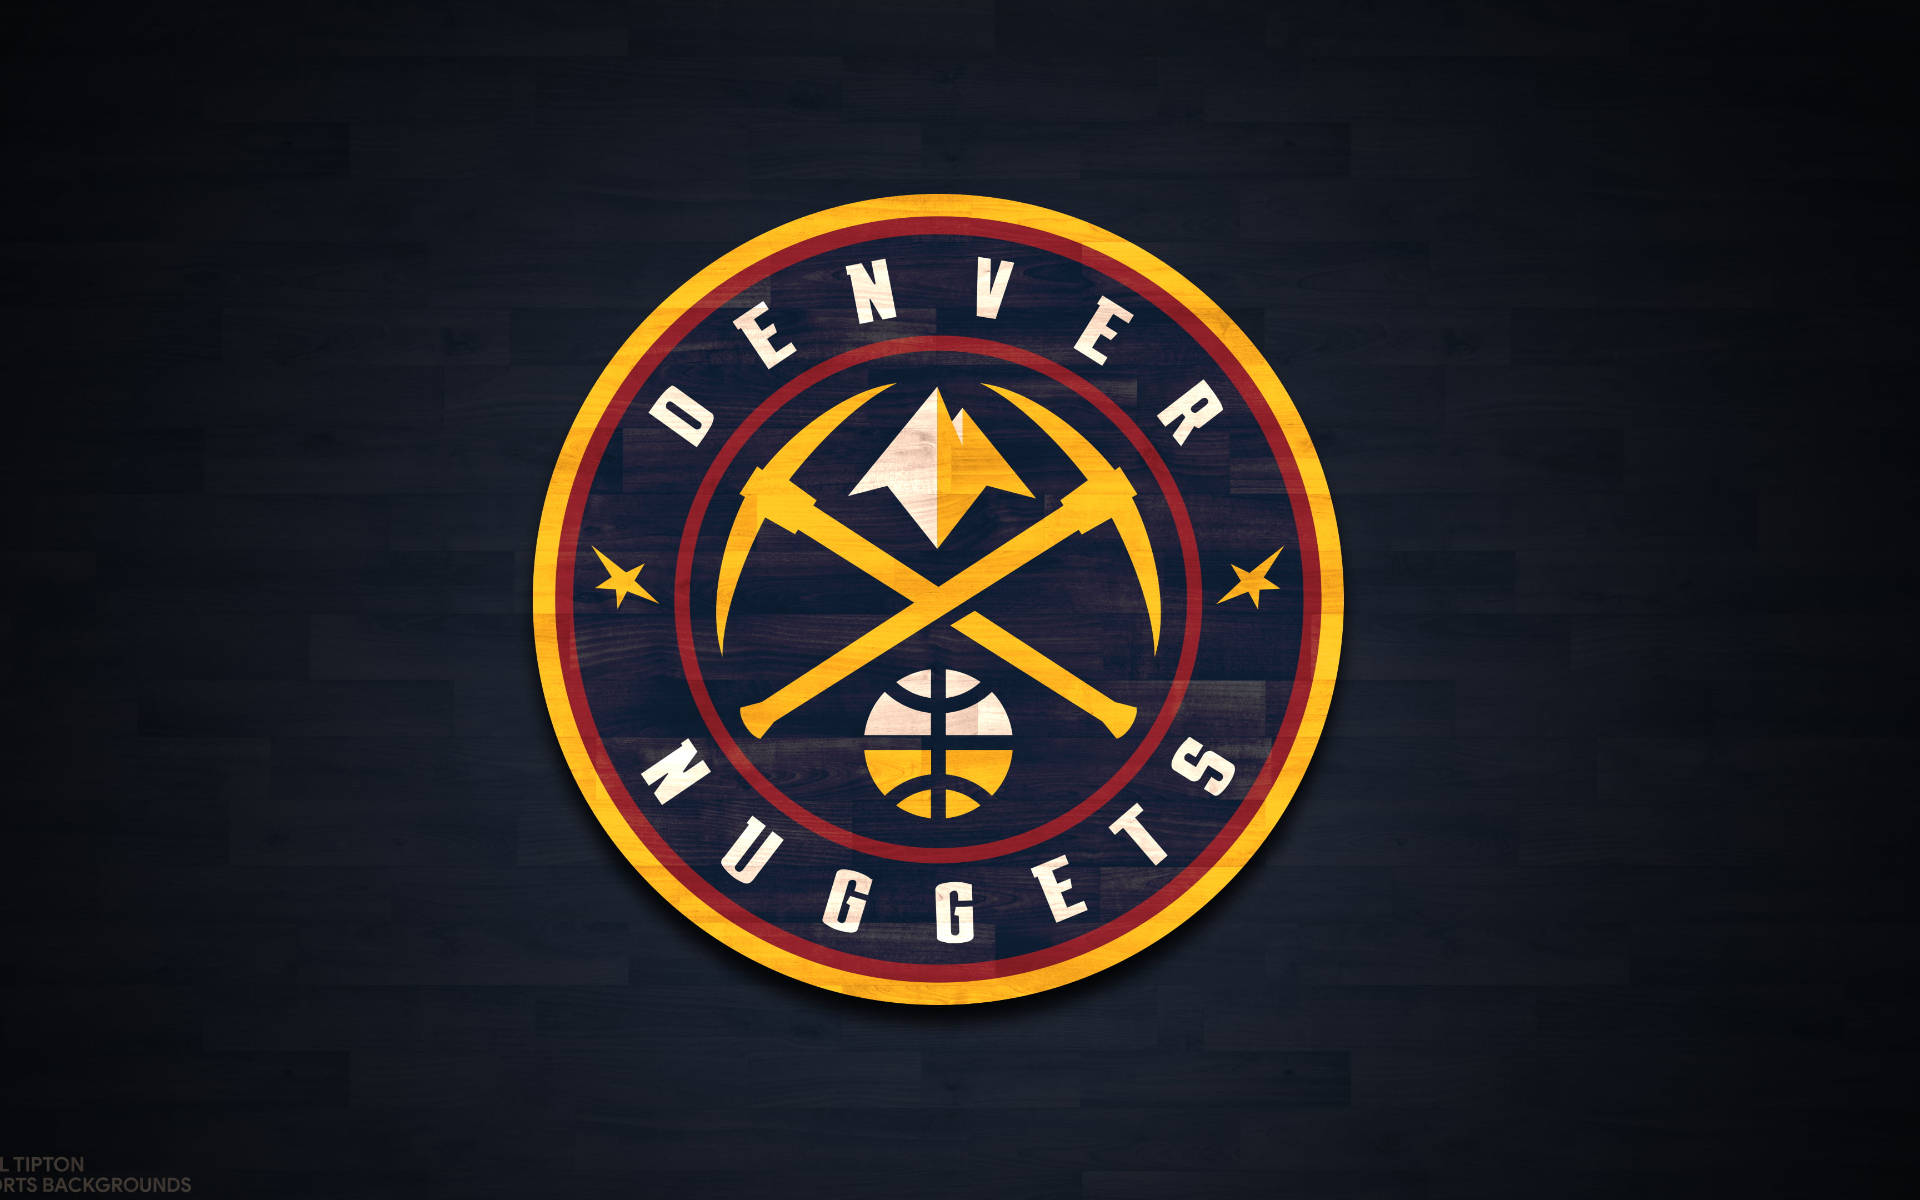 Action-packed Denver Nuggets Basketball Game Wallpaper